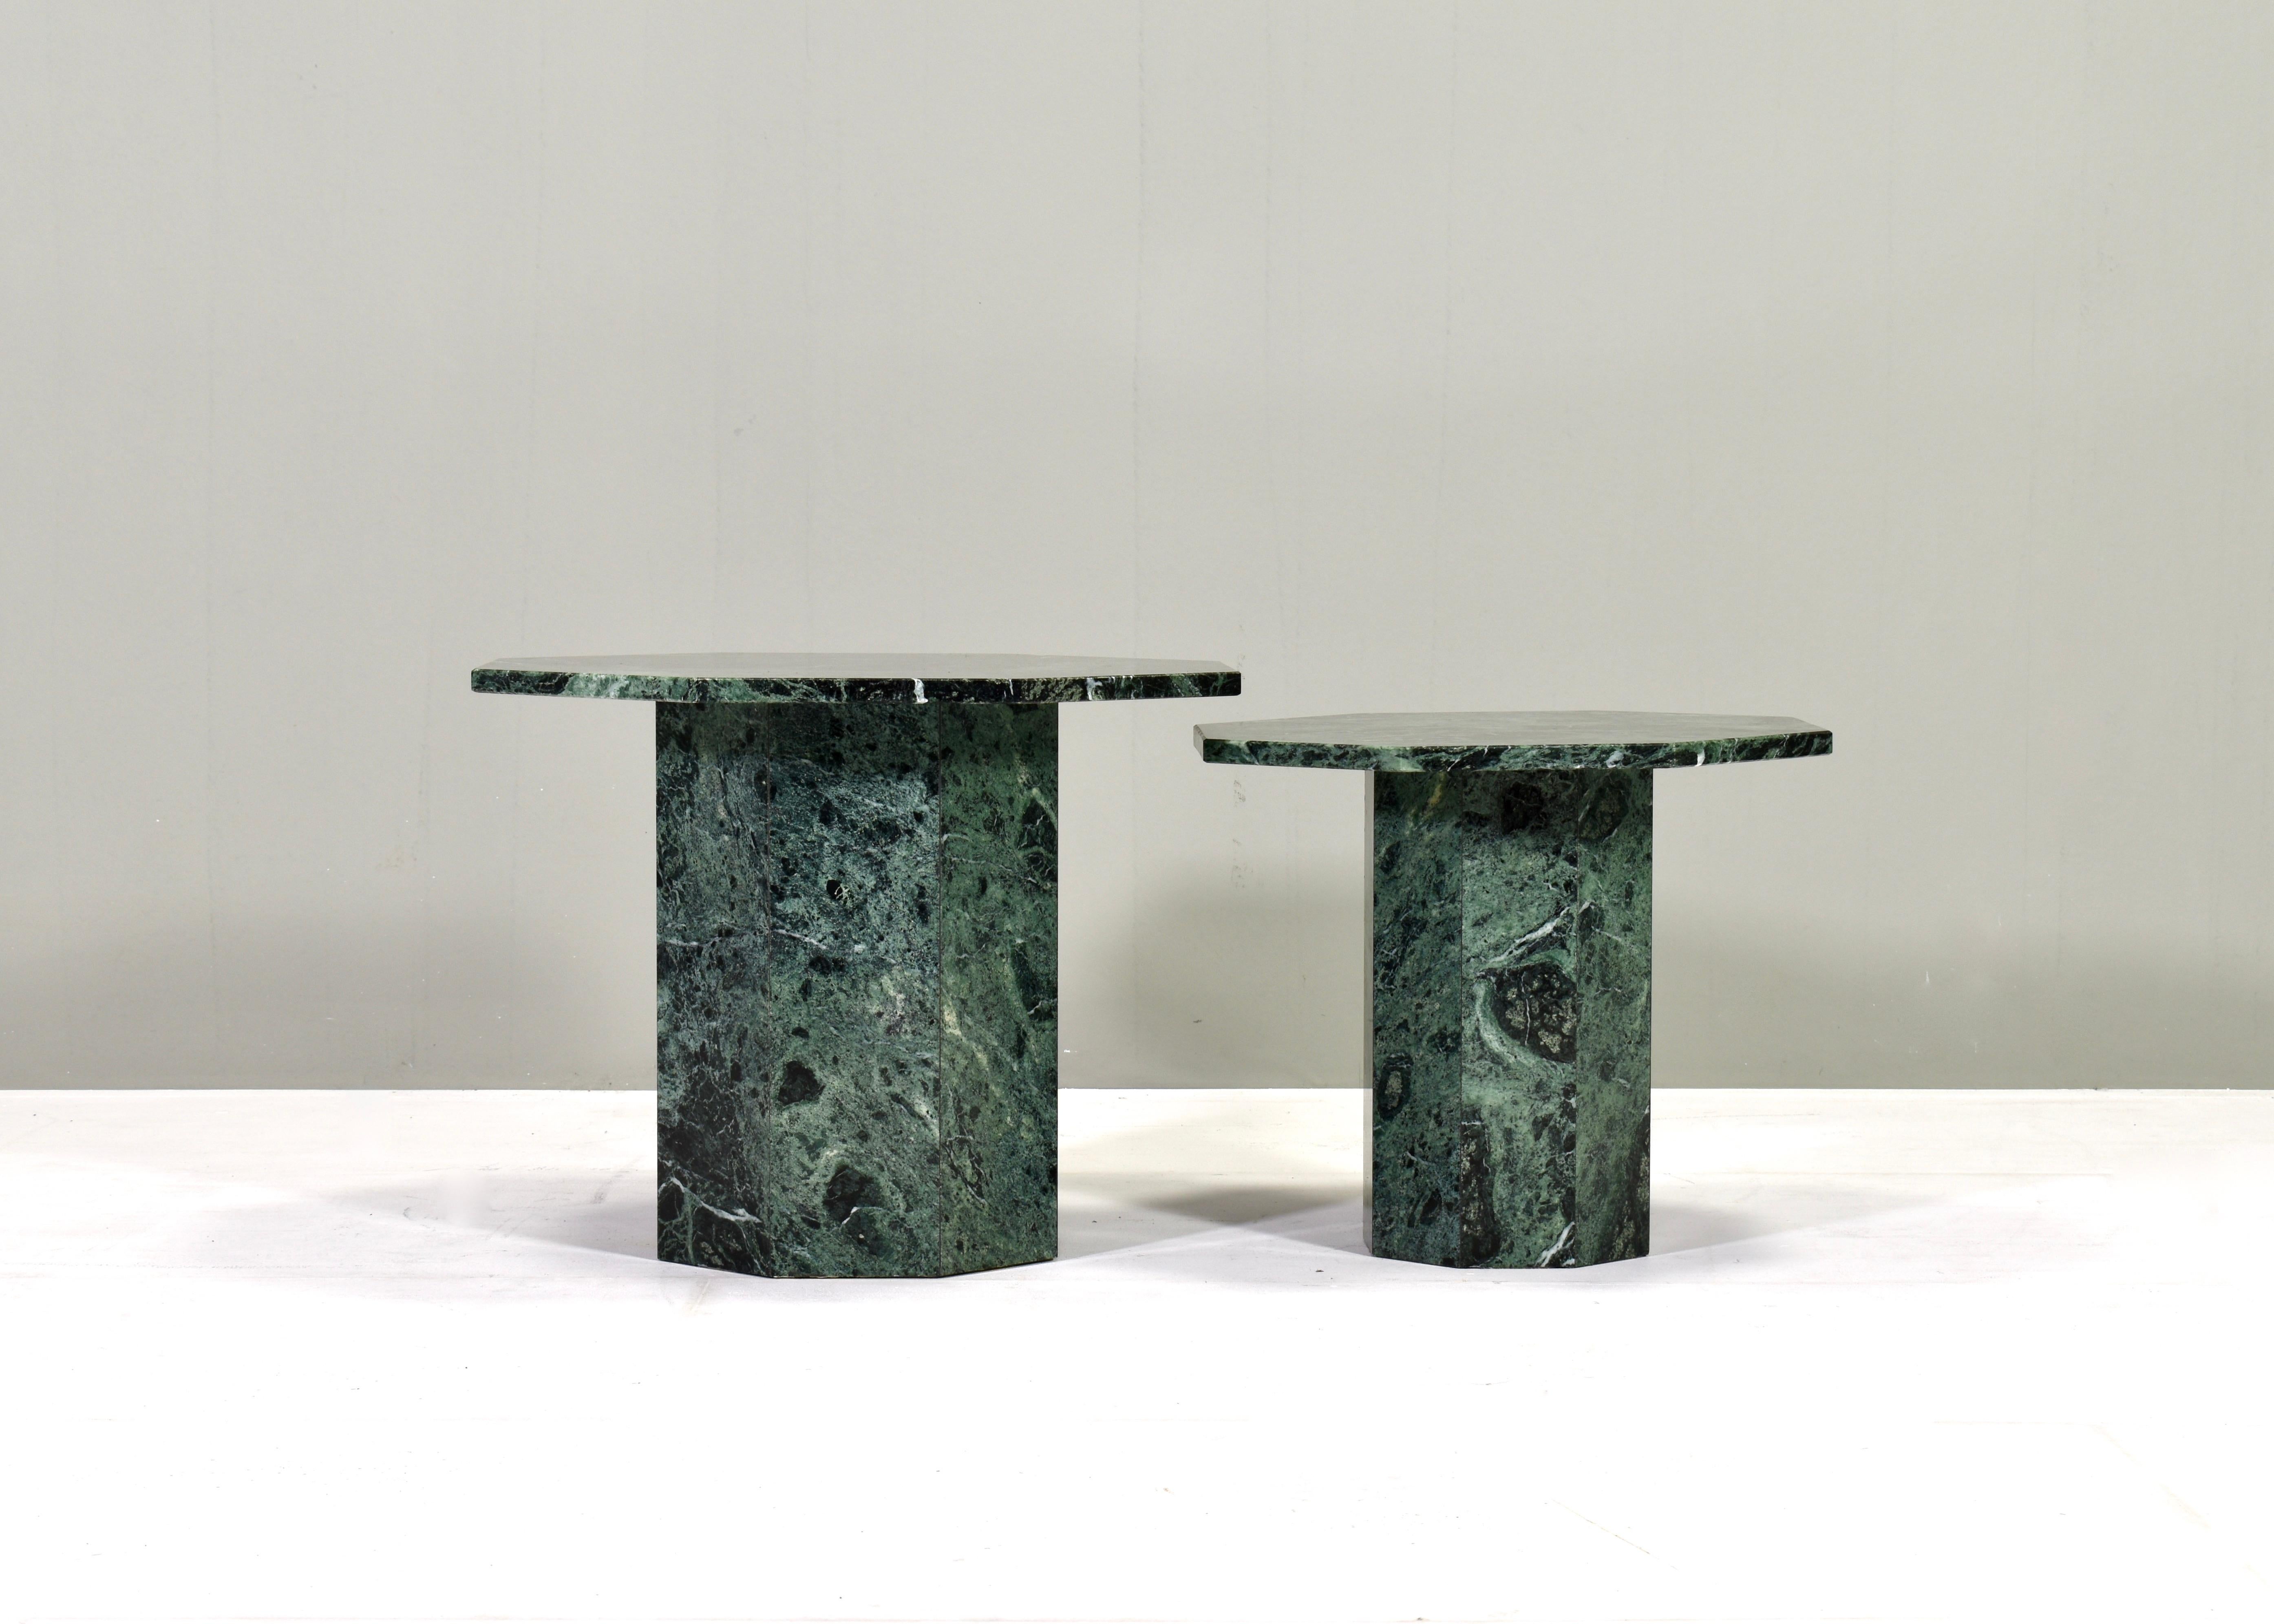 Pair of green Italian marble coffee / side tables, circa 1970.

Designer: Unknown
Manufacturer: Unknown
Country: Italy
Model: Coffee / side tables
Design period: 1970’s
Date of manufacturing: circa 1970
Size wdh in cm: 
Small table: ø52x43